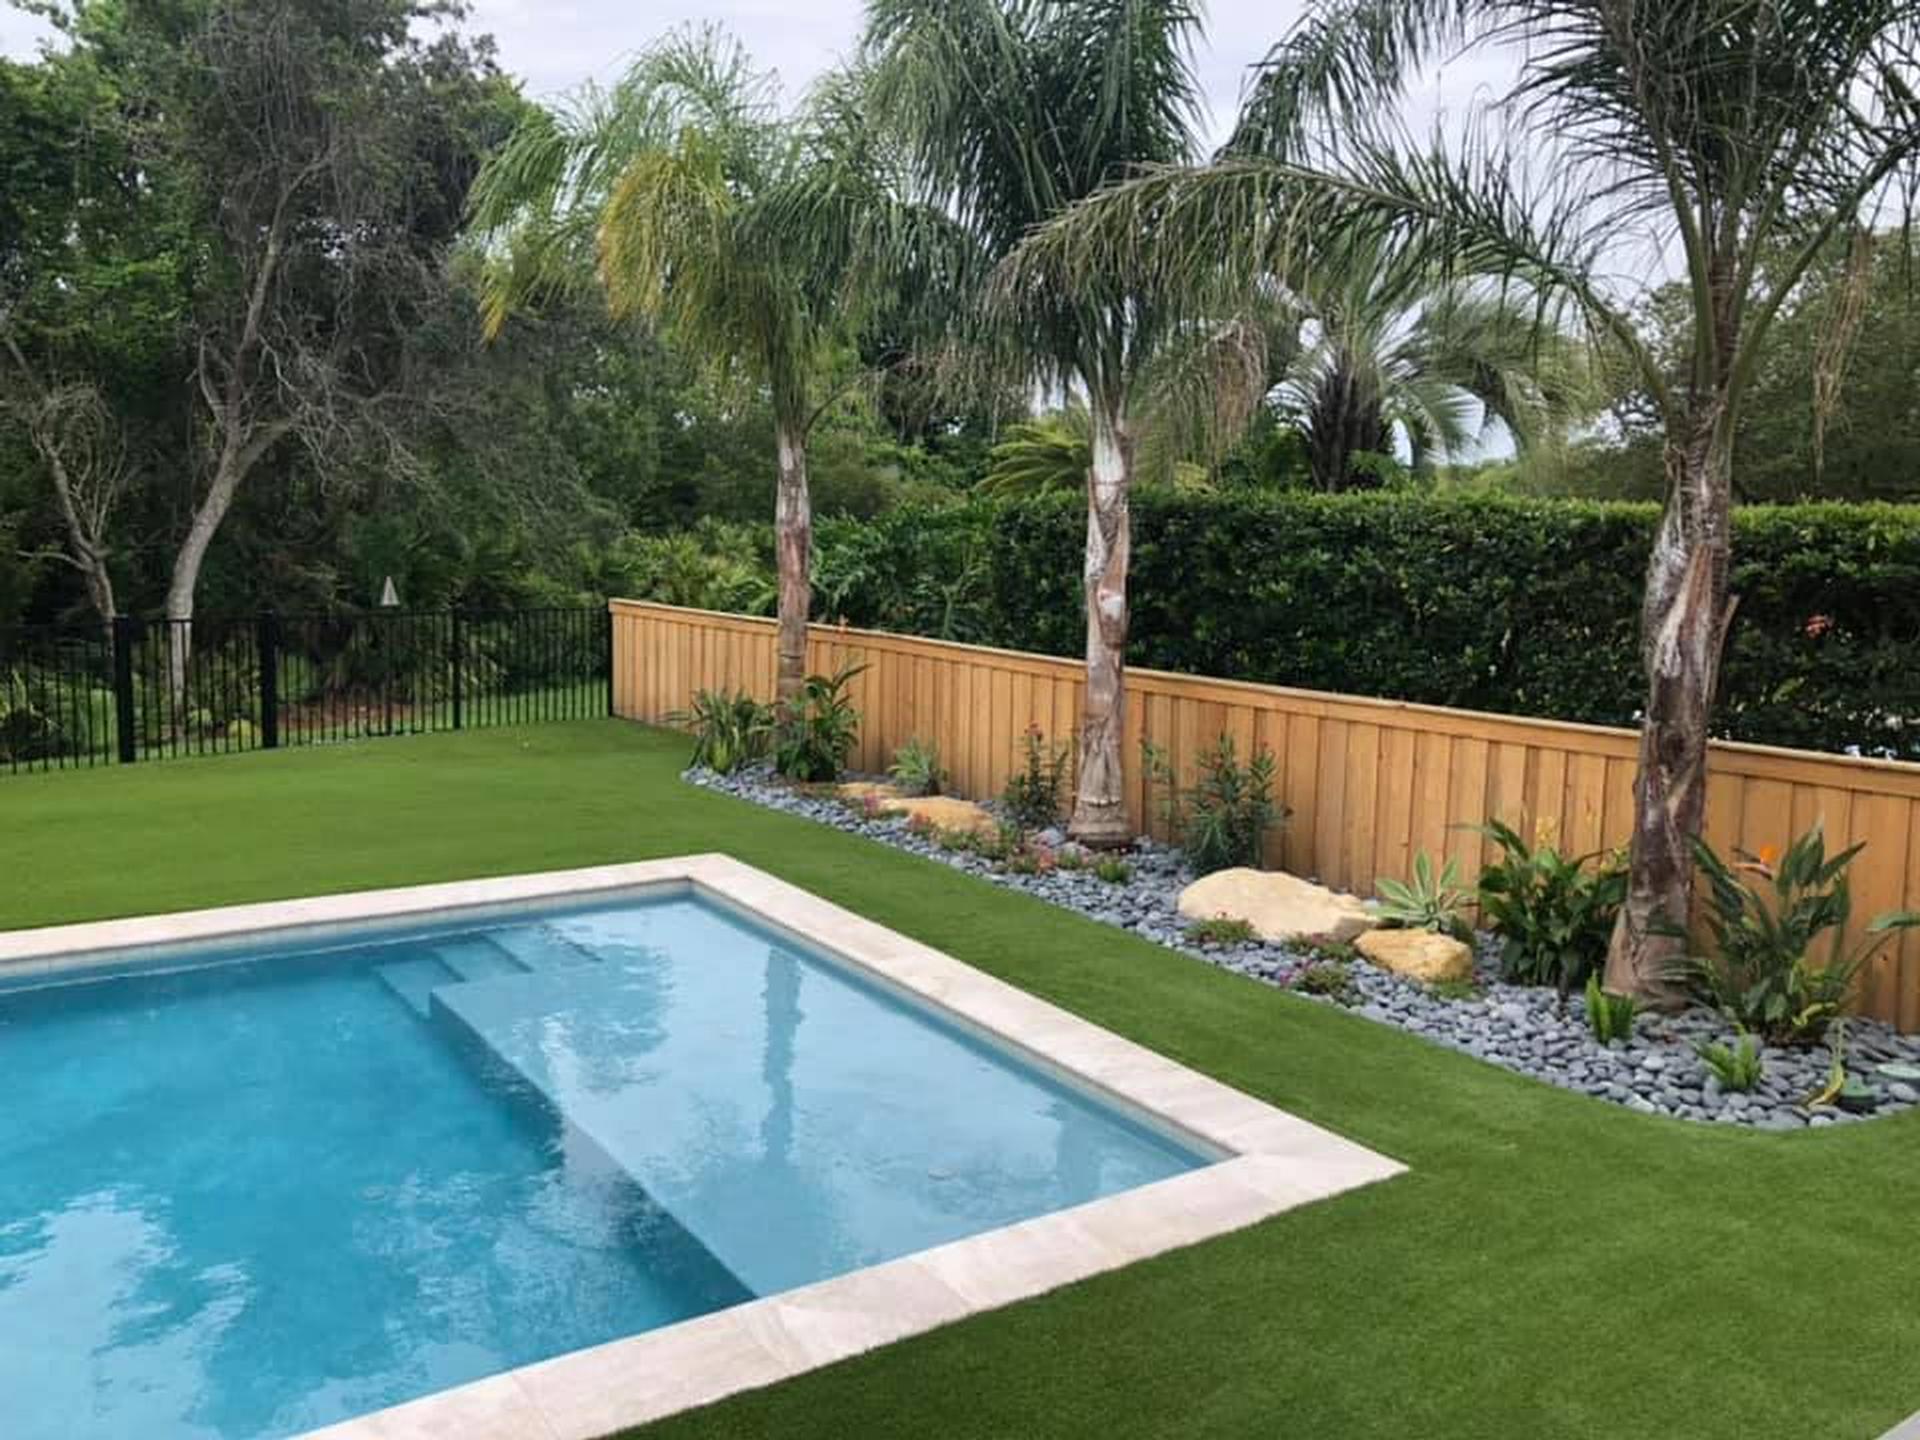 Transform Your Lawn with Premium Artificial Turf Installation in Jacksonville, Florida